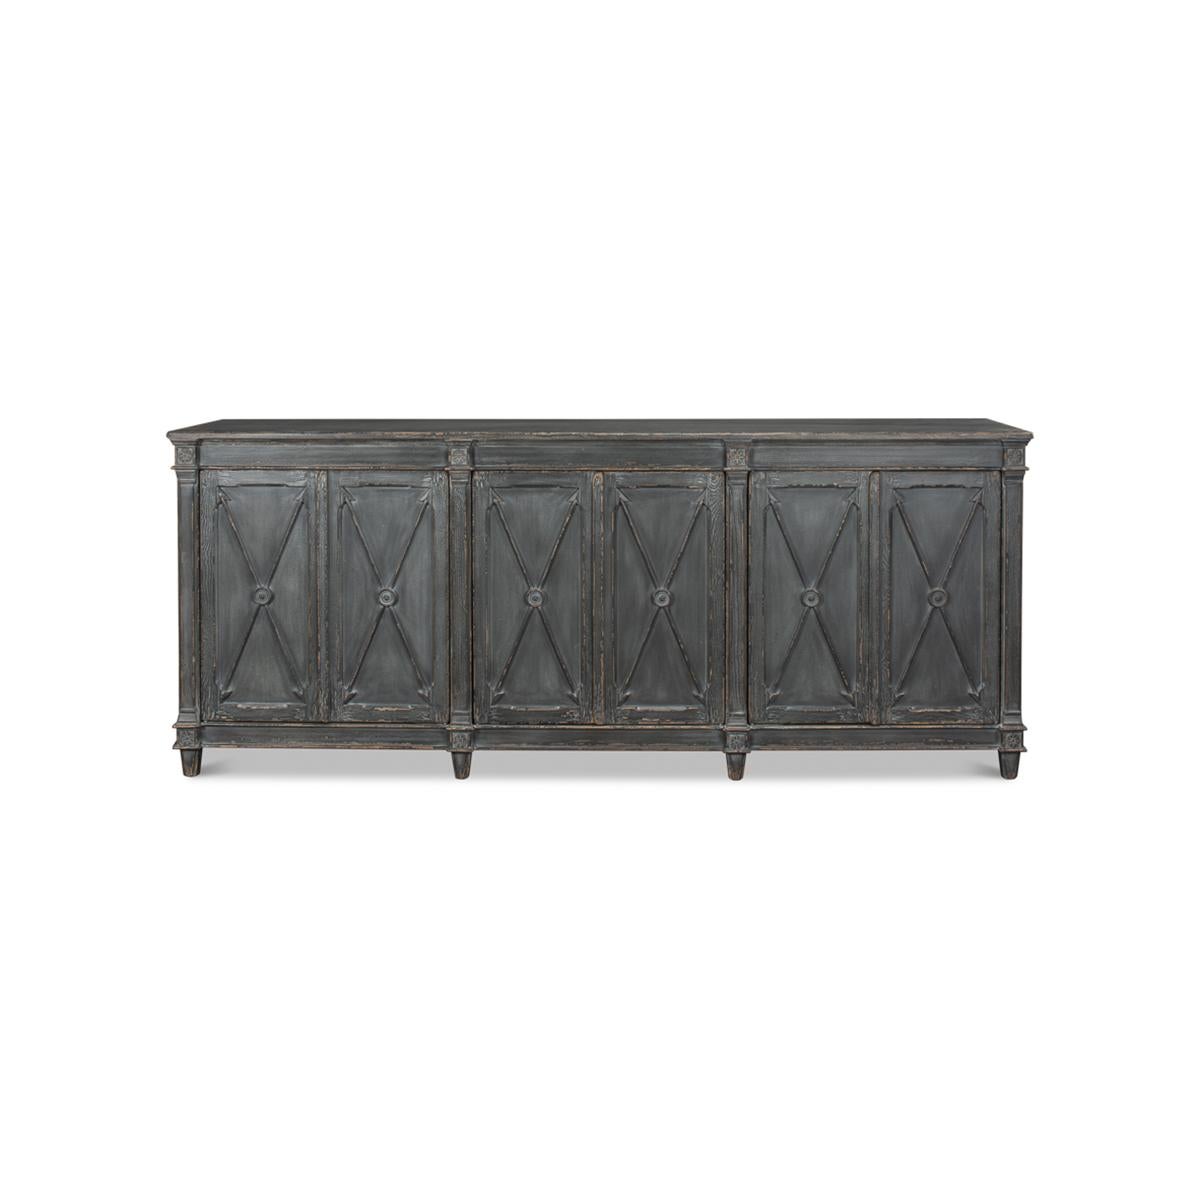 With crossed arrows on each door, raised panel detail on each side, and medallions at the top and bottom of the column-like stiles.

In a dark gray rustic and distressed finish. With paneled sides, six doors opening to a fitted and shelved interior,